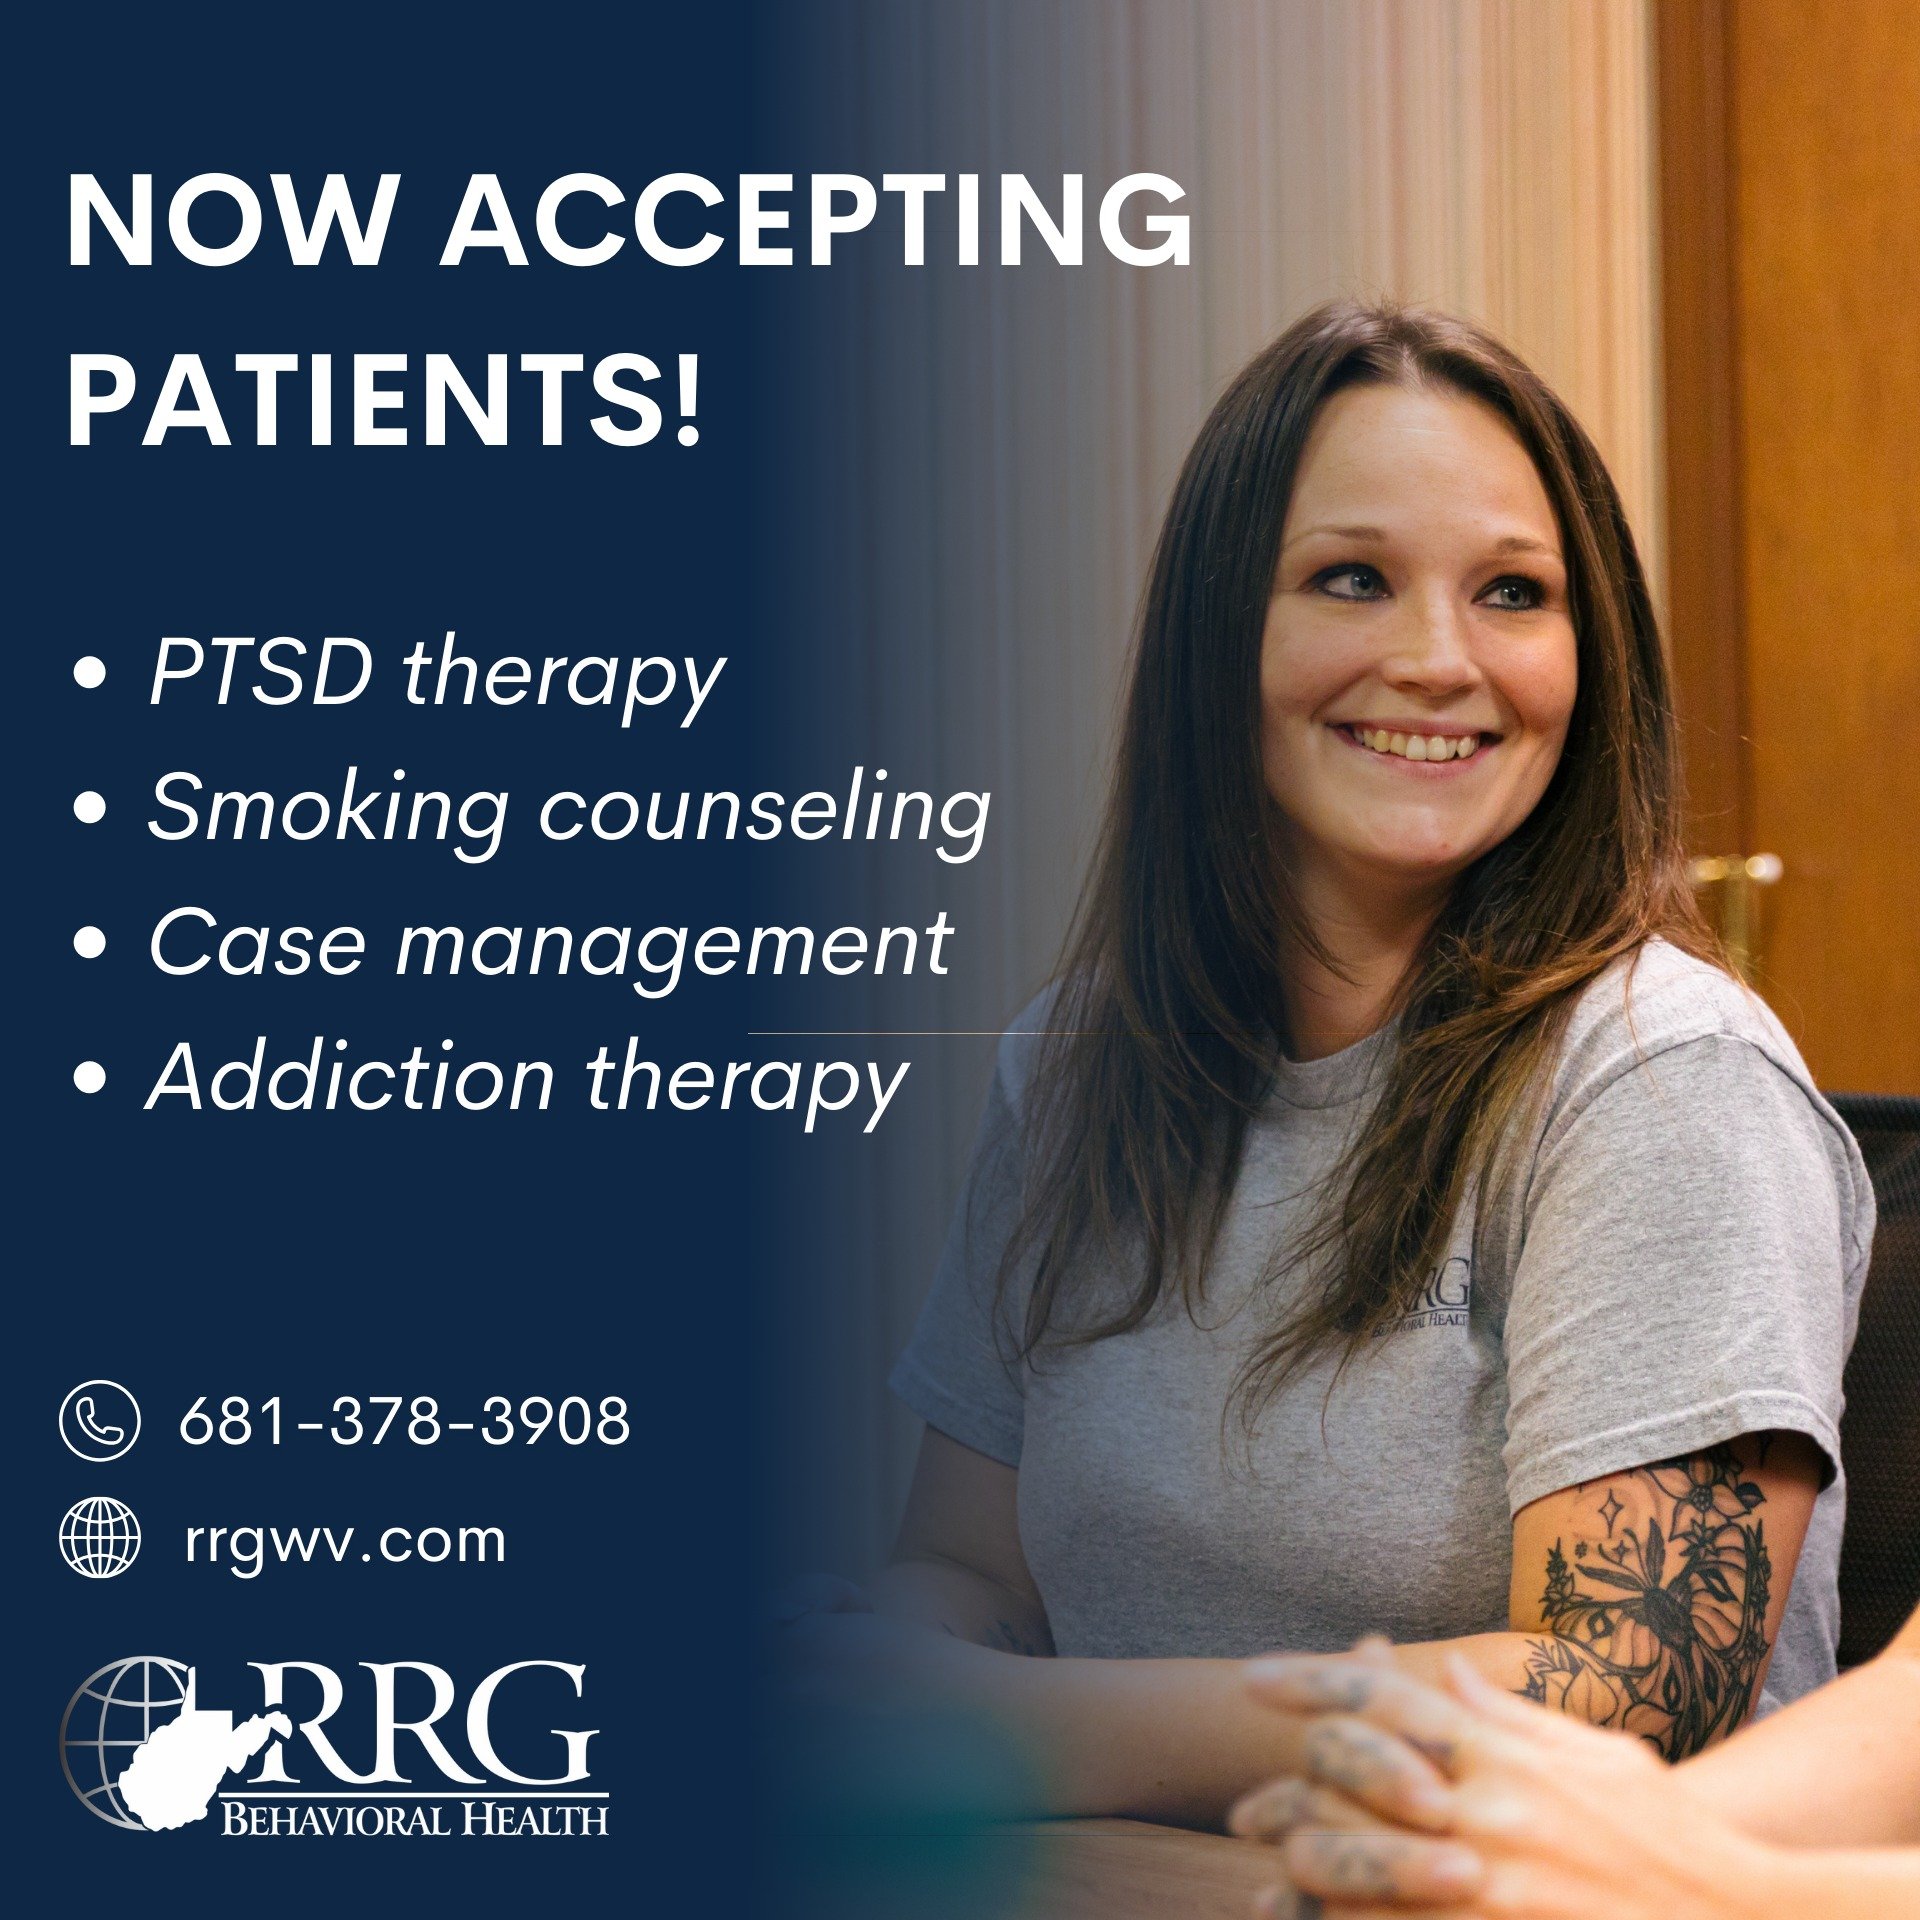 New patients are welcome at our Huntington and Elkins facilities! 

Our team is dedicated to supporting you through each phase of recovery. Begin your path to a healthier, addiction-free life by contacting us today. 

Explore our services at rrgwv.co